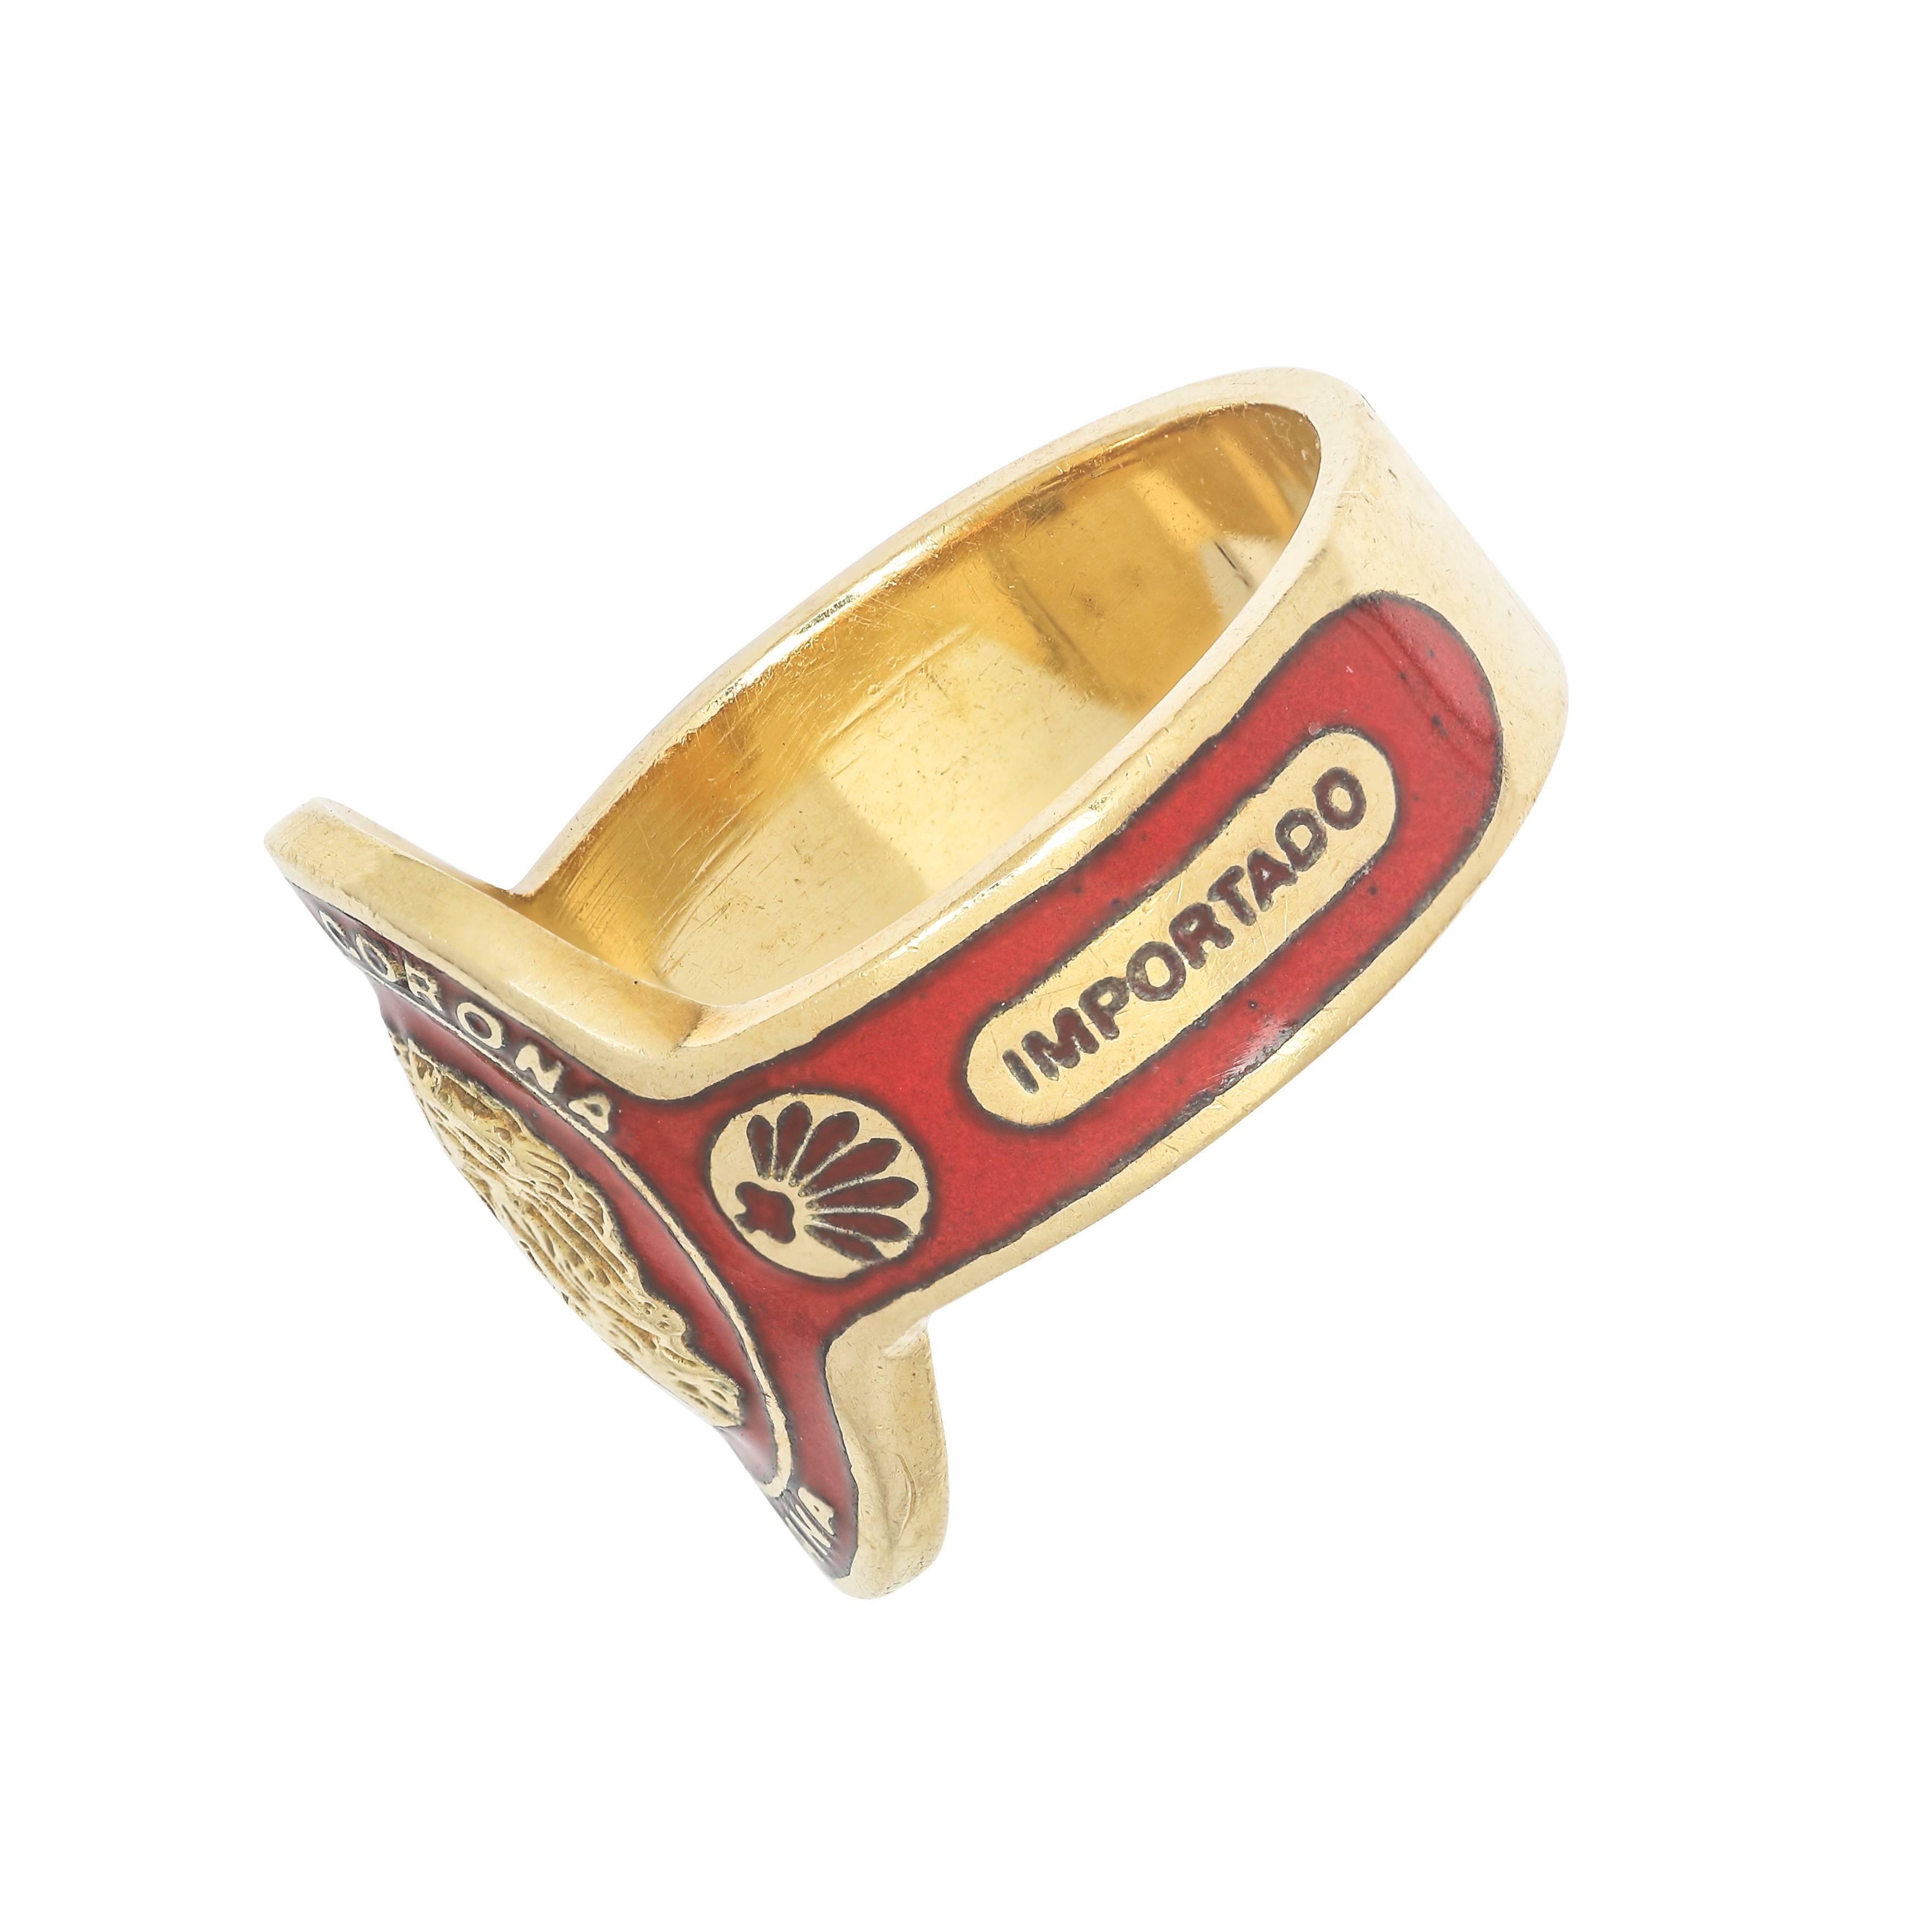 Signed Cartier 18k.  Red enamel Havana Corona cigar band ring.  Size 6
Excellent condition.